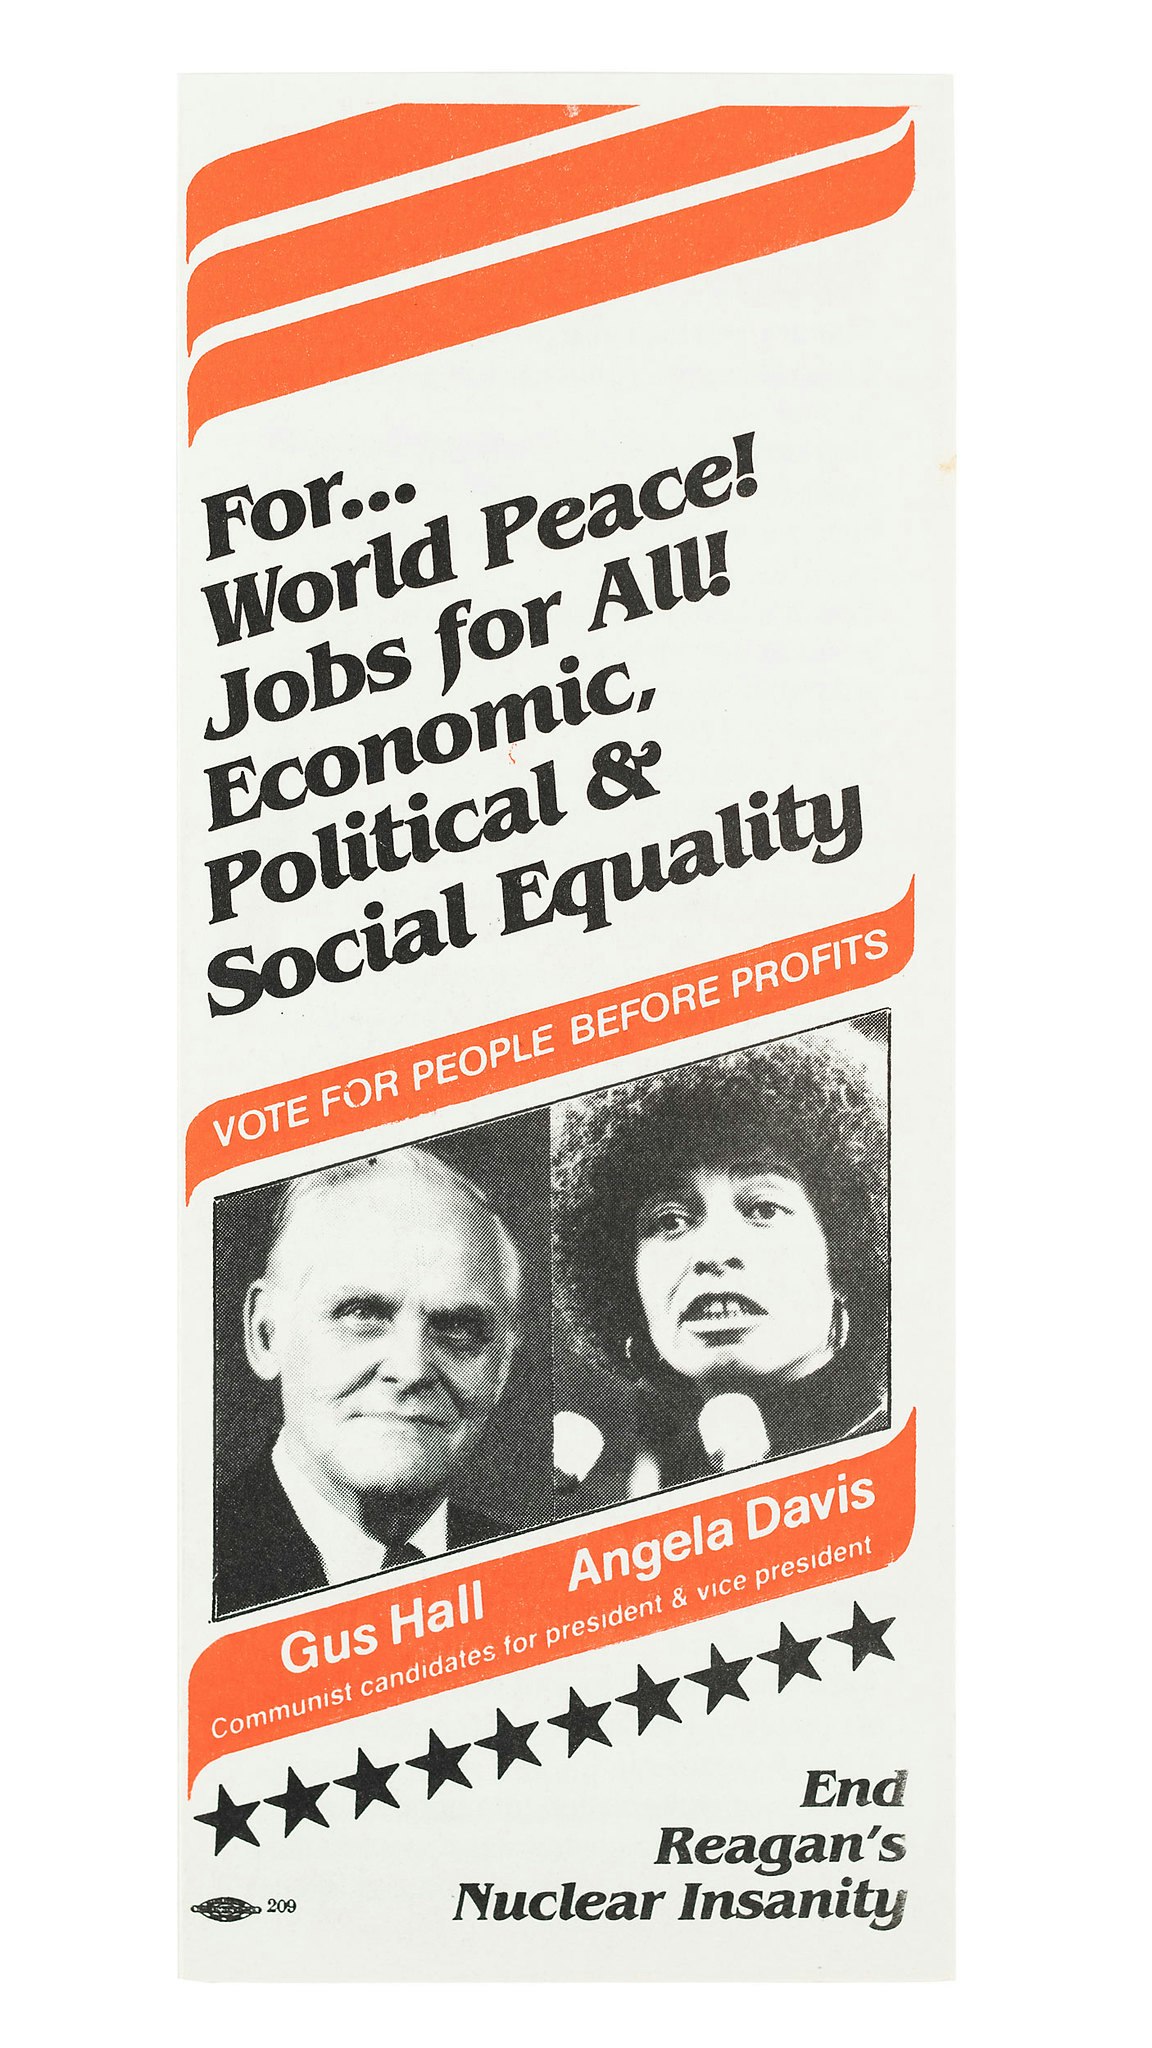 Headshots of Gus Hall and Angela Davis on pamphlet design. With banners in orange throughout.